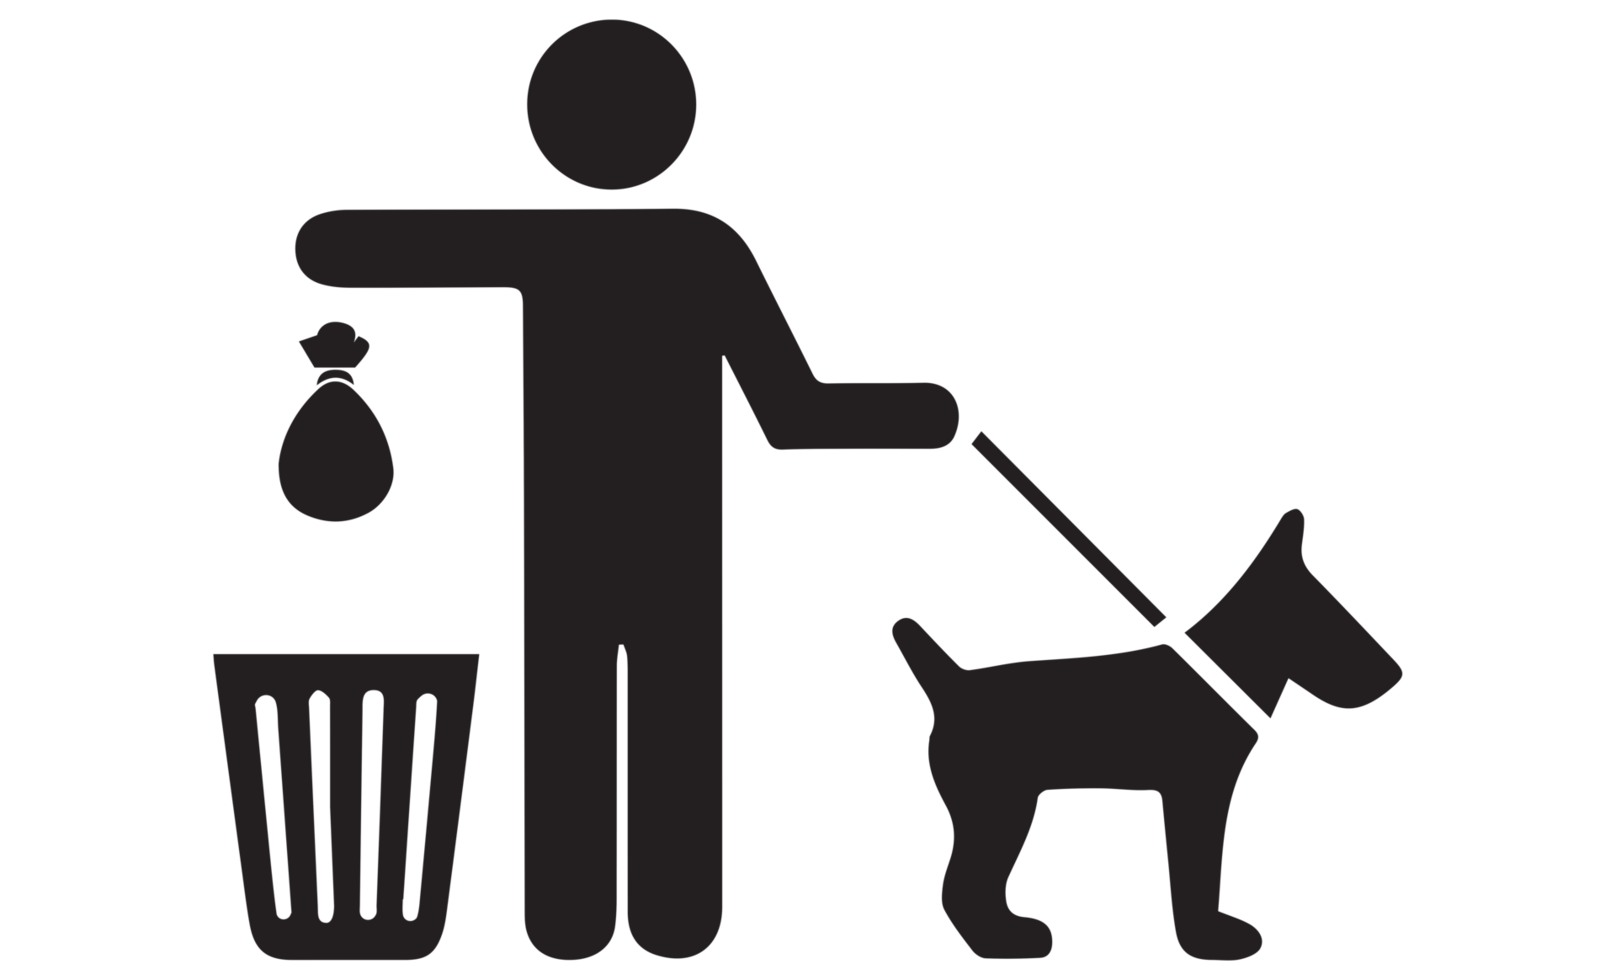 Clean after your dog icon on transparent background png